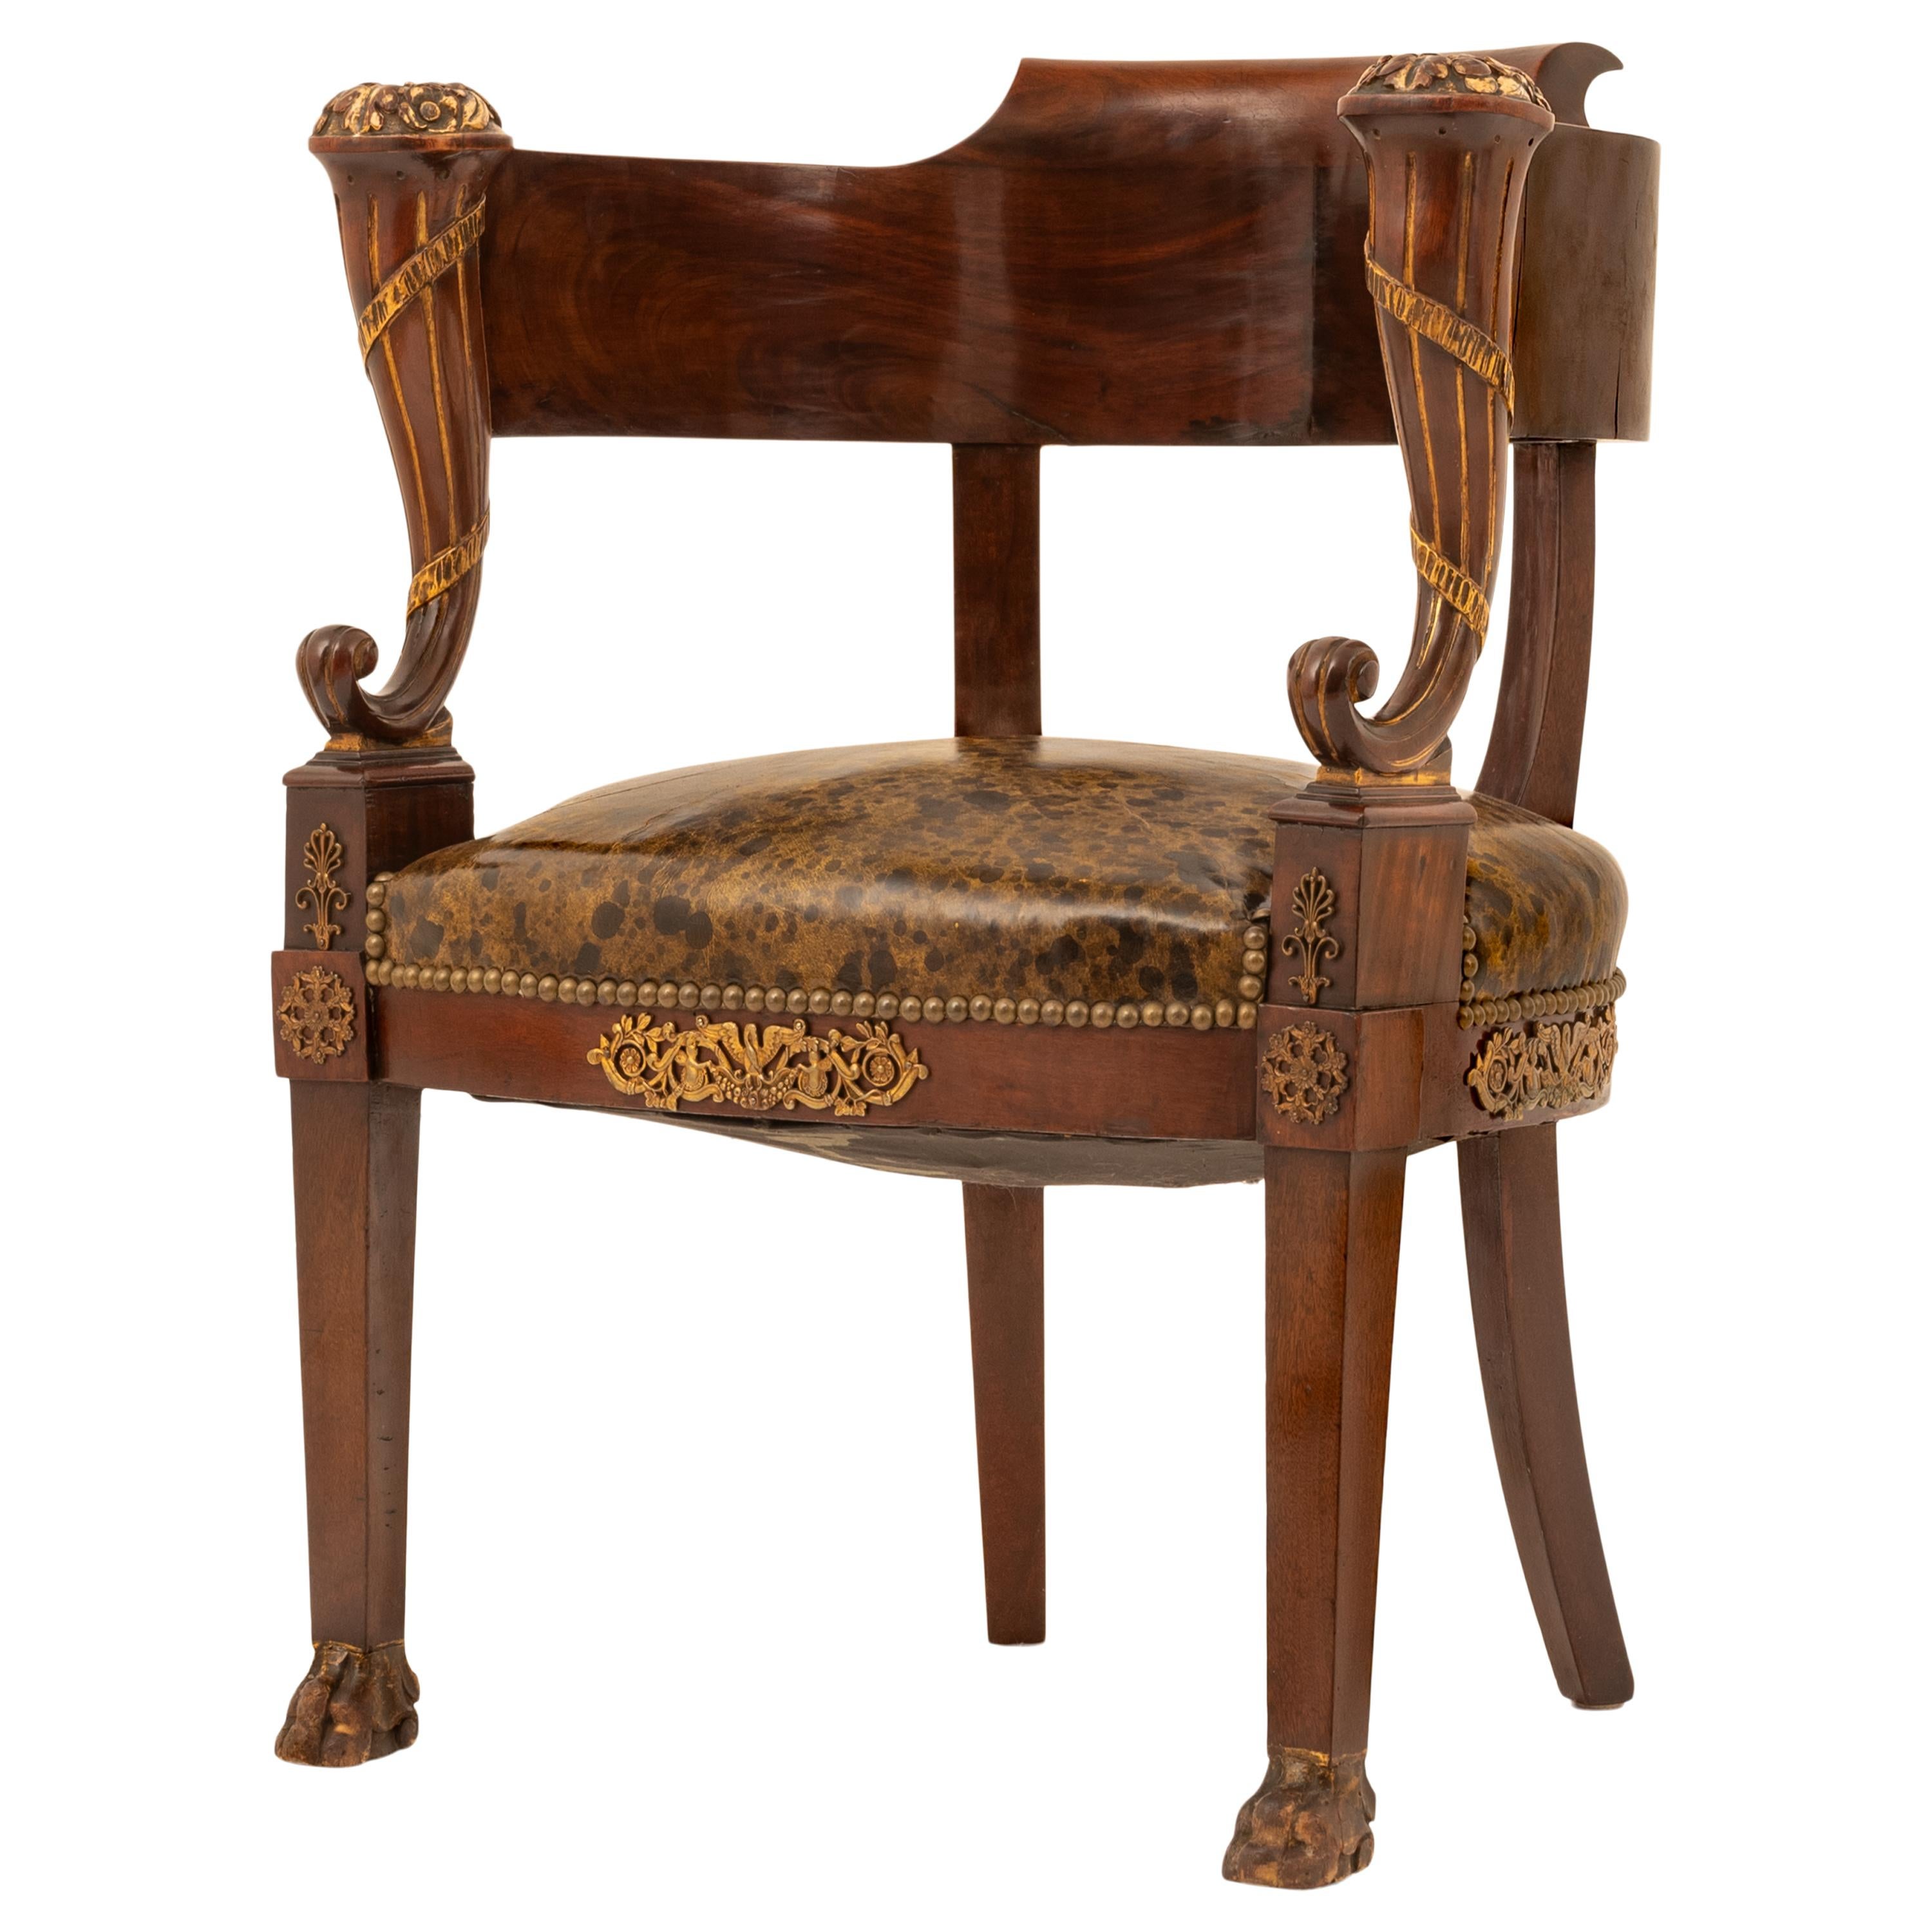 A fine & stylish antique French Empire Napoleonic parcel gilt and ormolu mounted French Fauteuil de bureau (desk chair), circa 1815.
The chair back and armrest of hooped shaped form, with a pair of parcel-gilt cornucopia supports, the leather seat